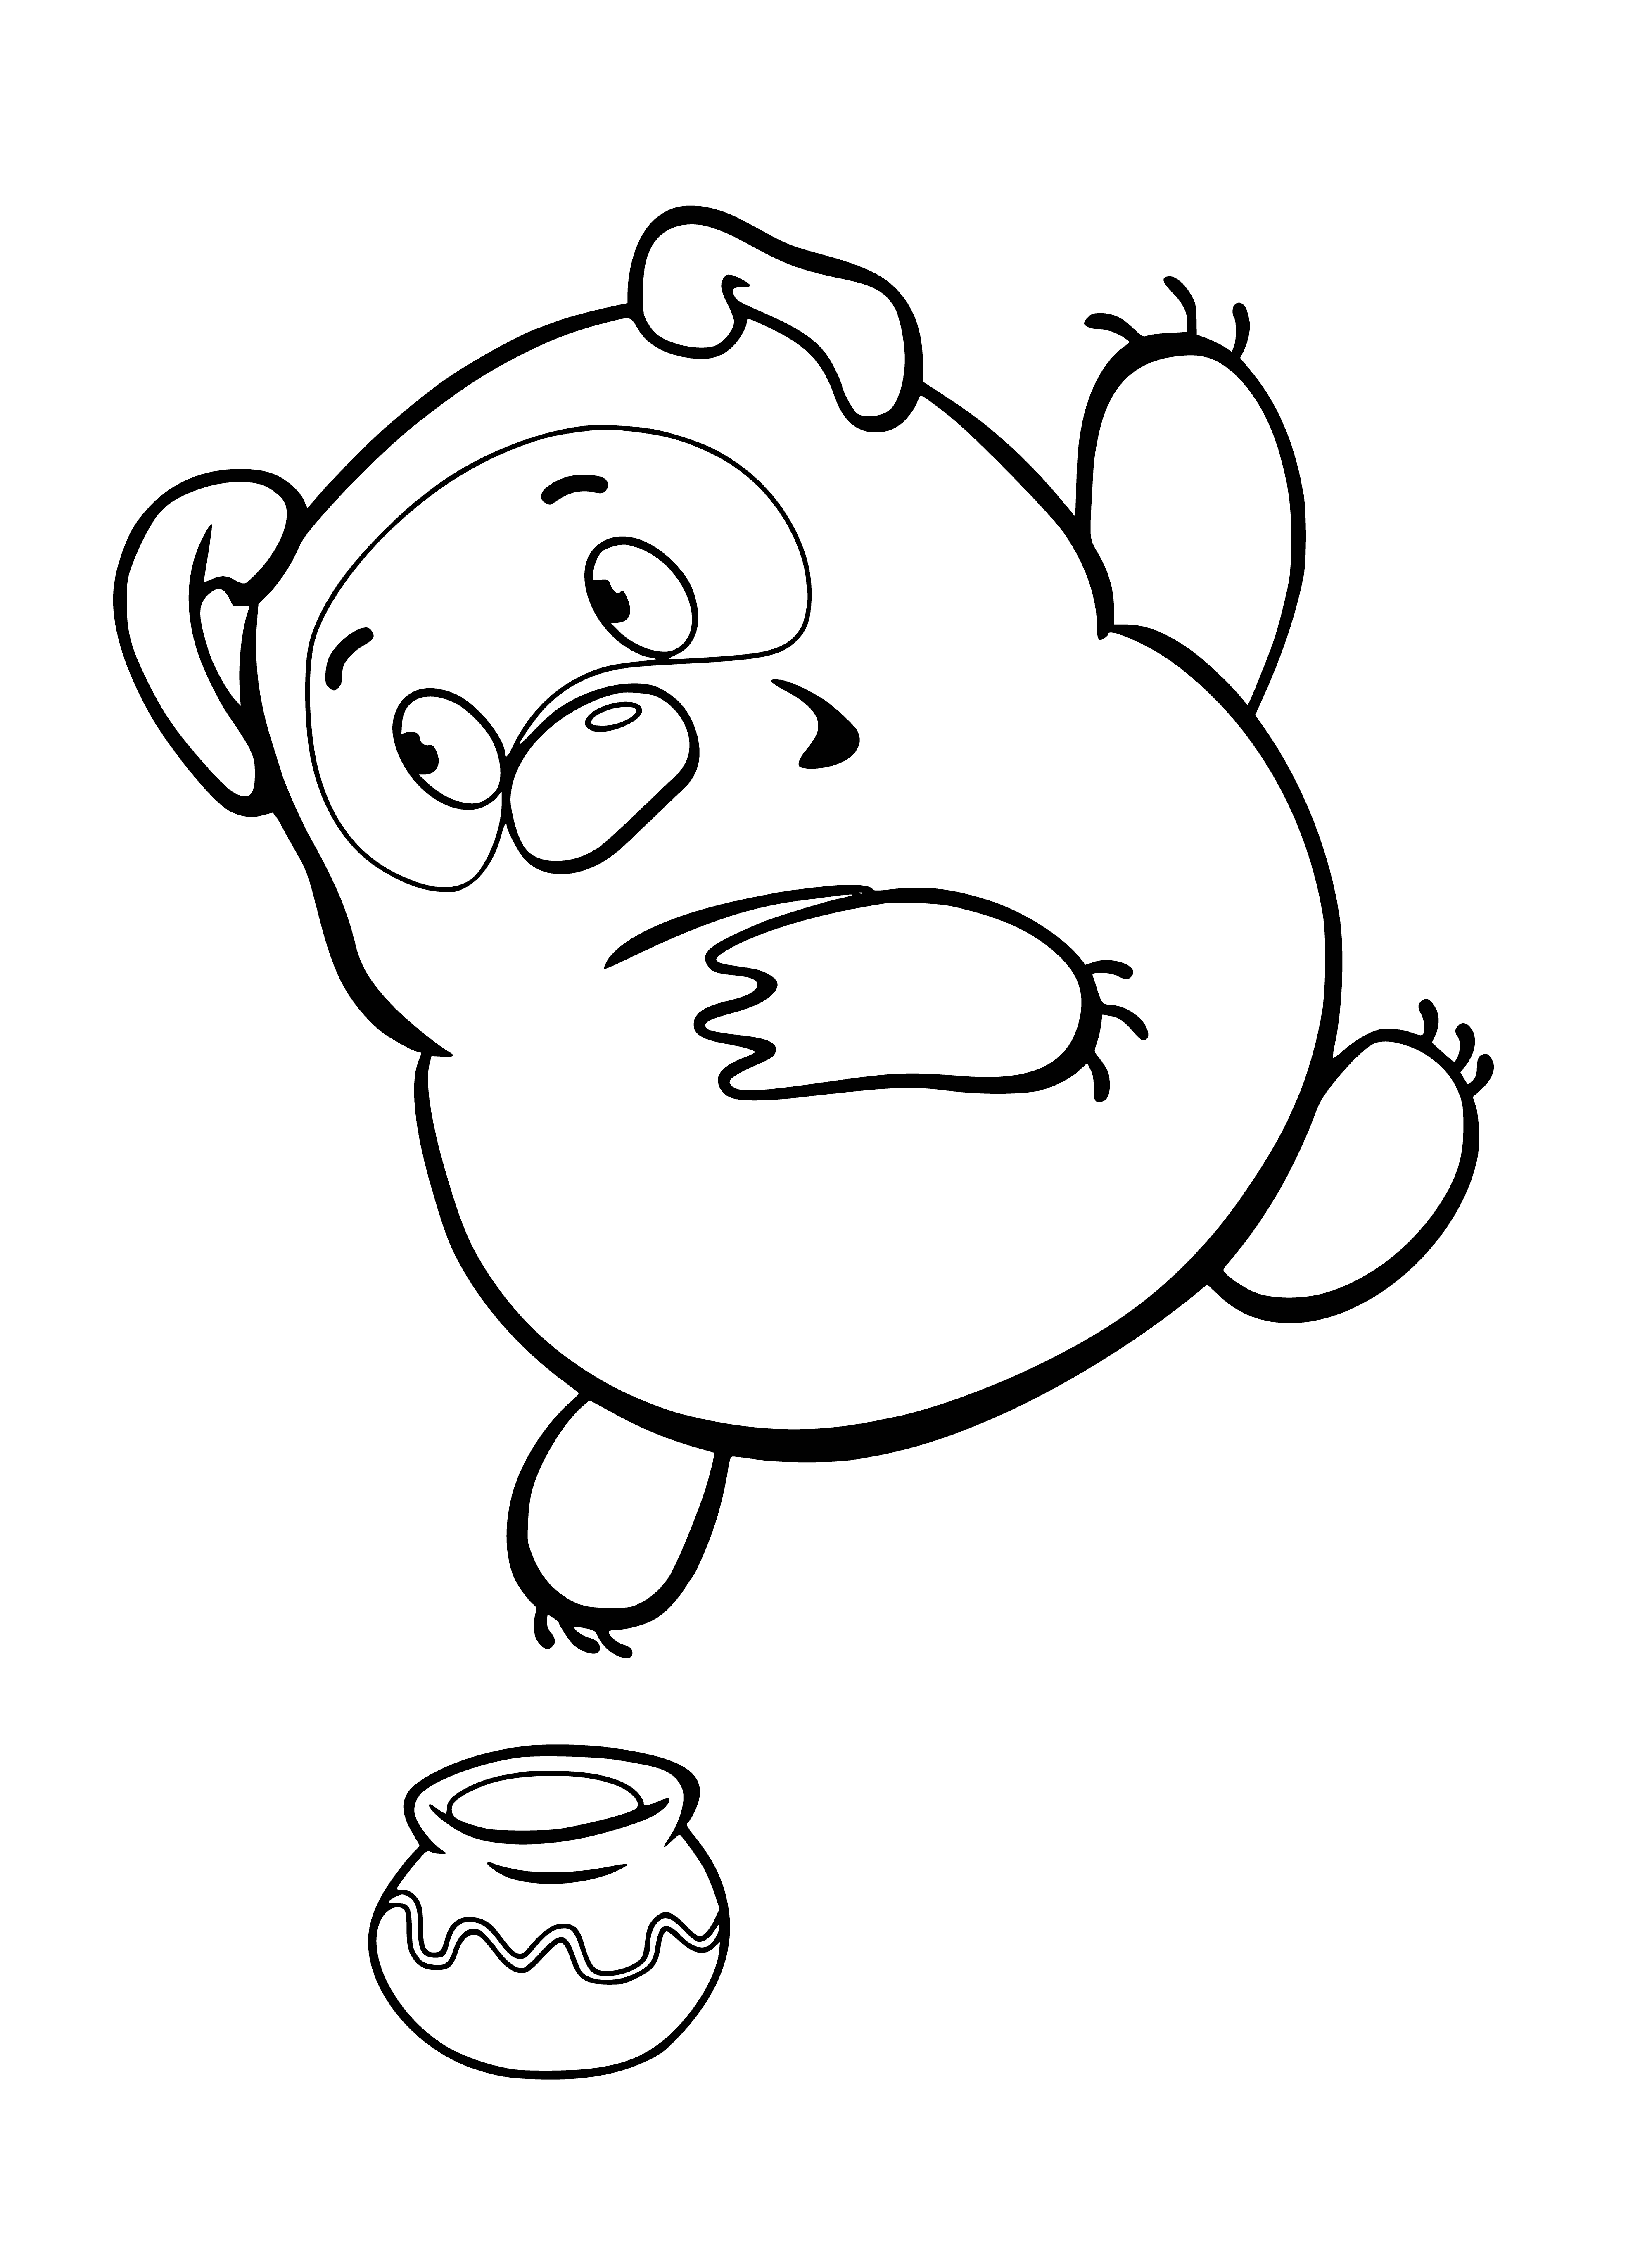 coloring page: Winnie the Pooh stands happily next to a big pot of honey, his front paws and big smile ready to enjoy his sweet treat.